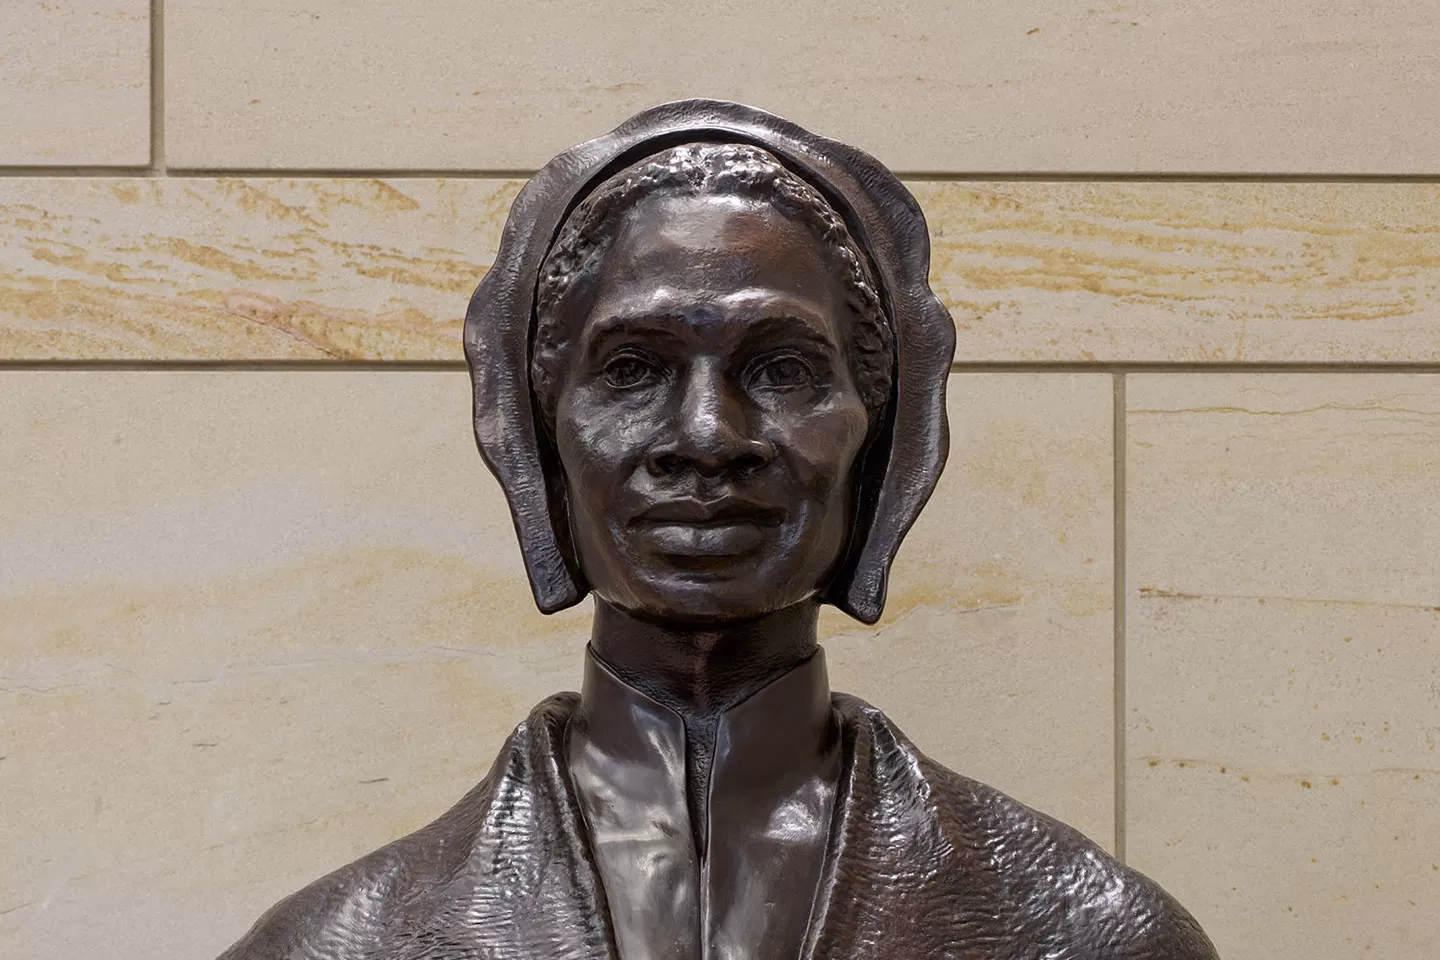 Bust of Sojourner Truth seen in Emancipation Hall of the U.S. Capitol Visitor Center.